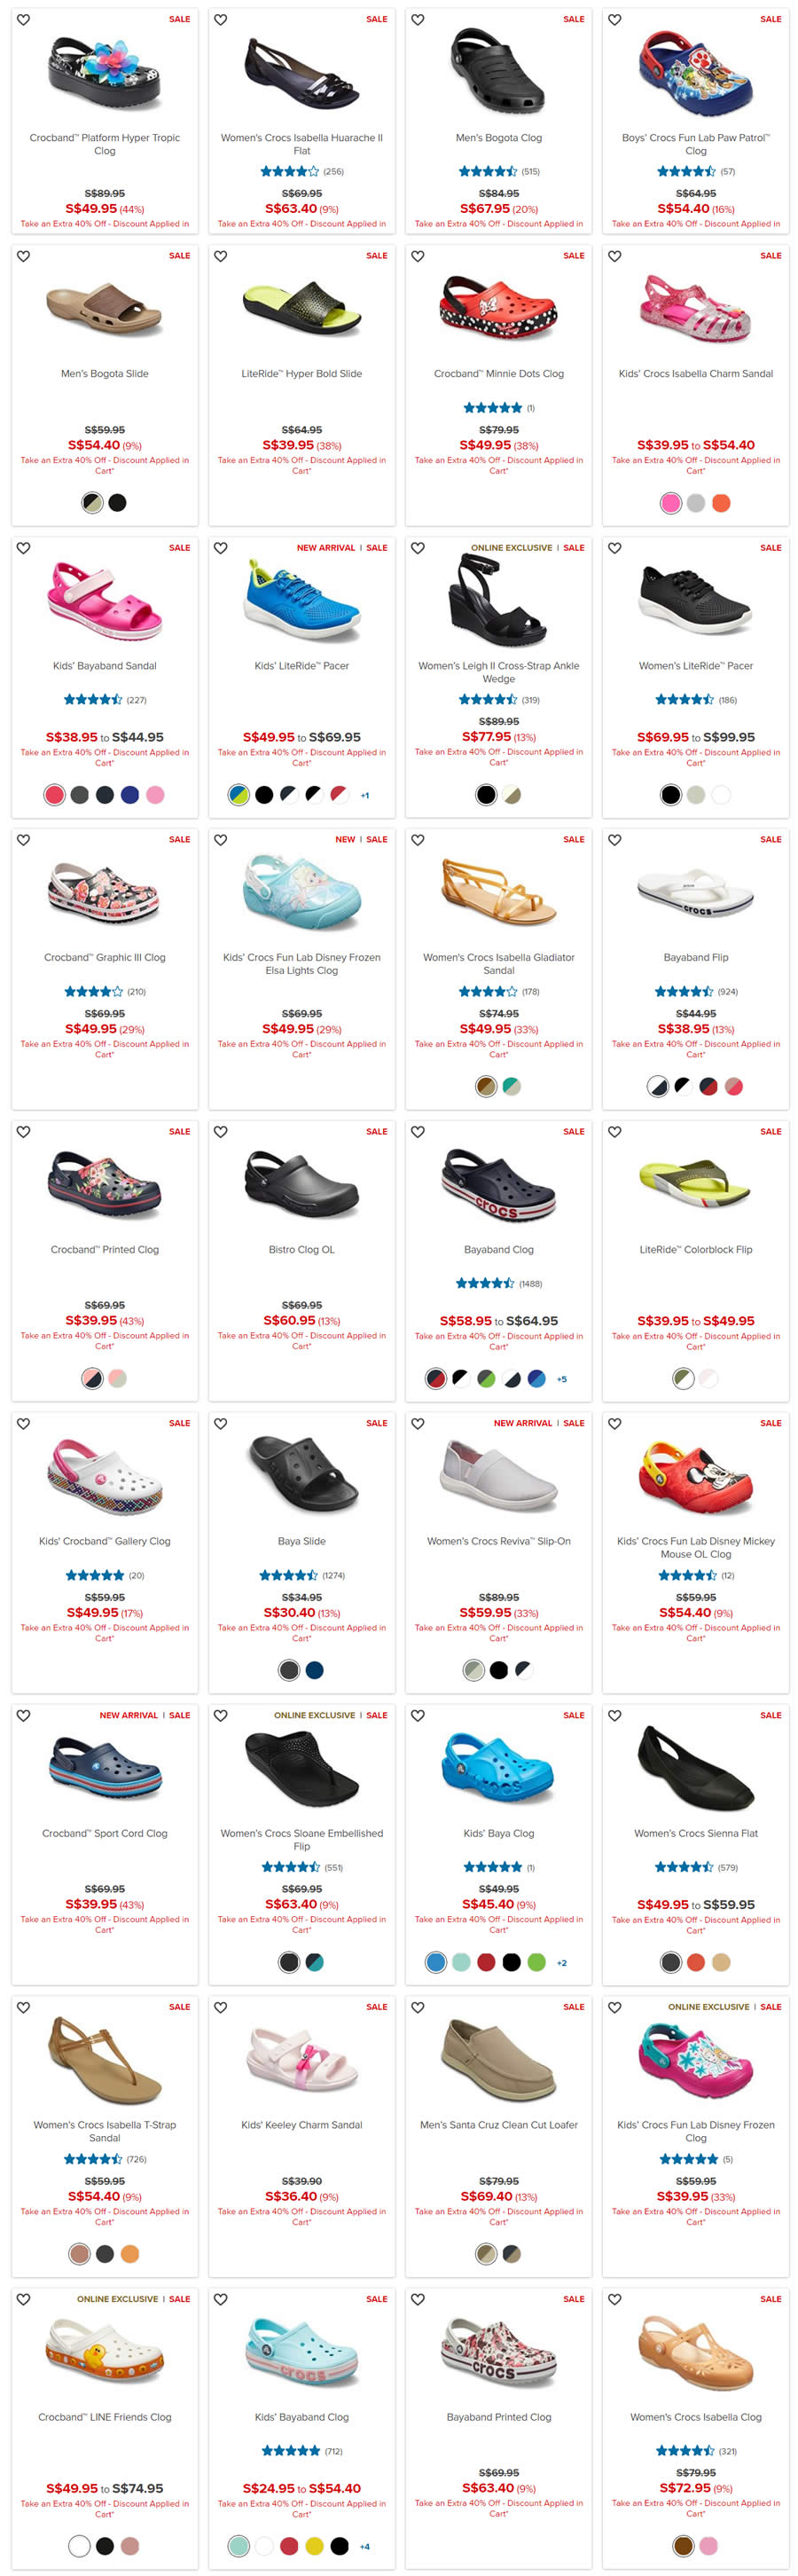 Crocs: Extra 40% Off on selected sale items till 5 February 2020